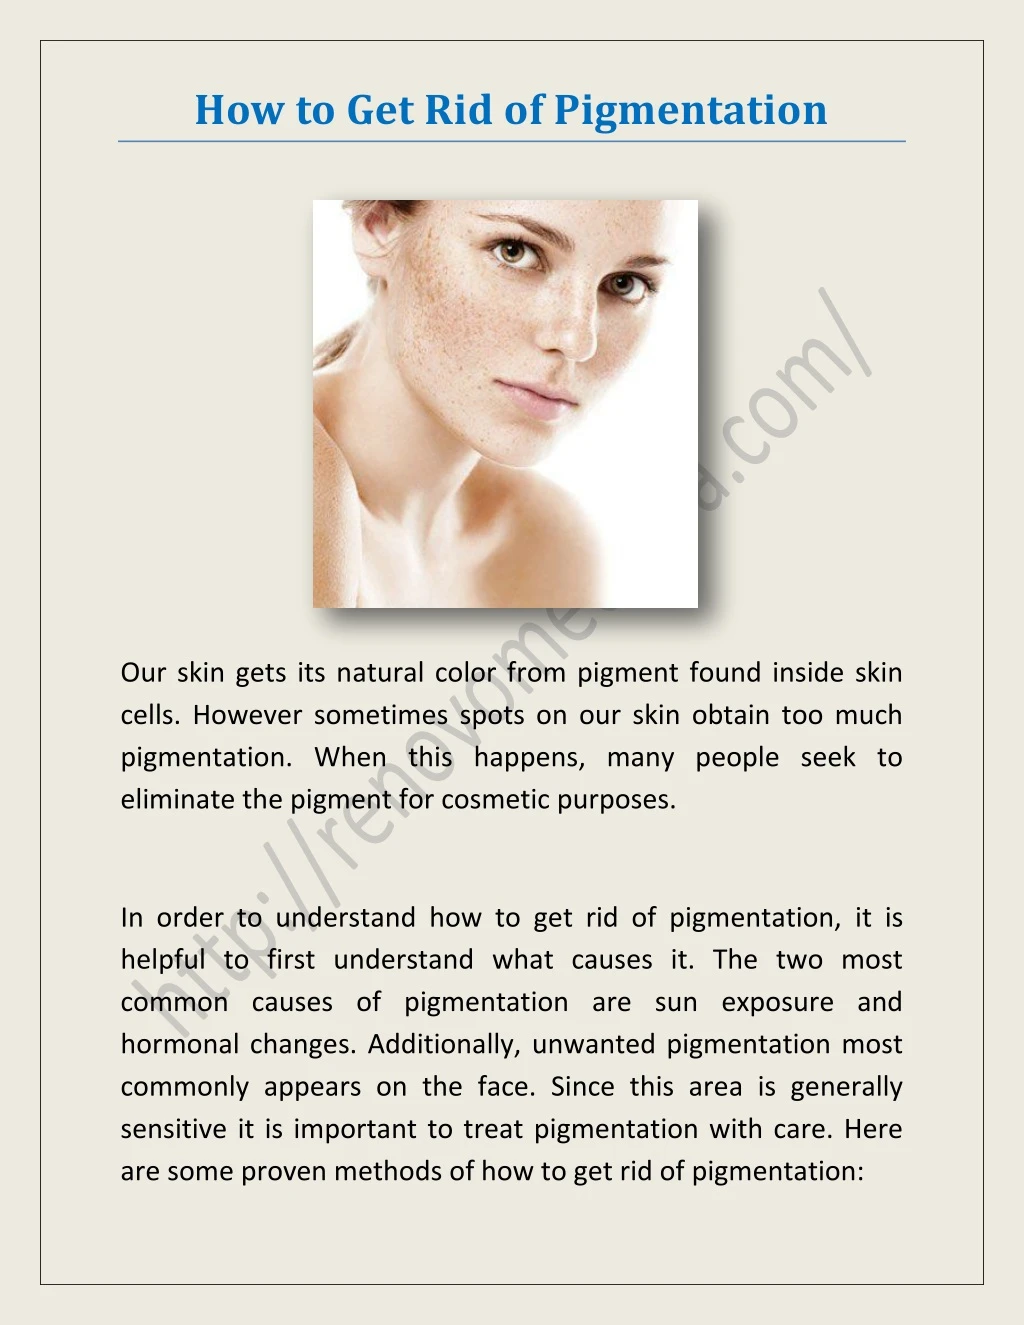 how to get rid of pigmentation